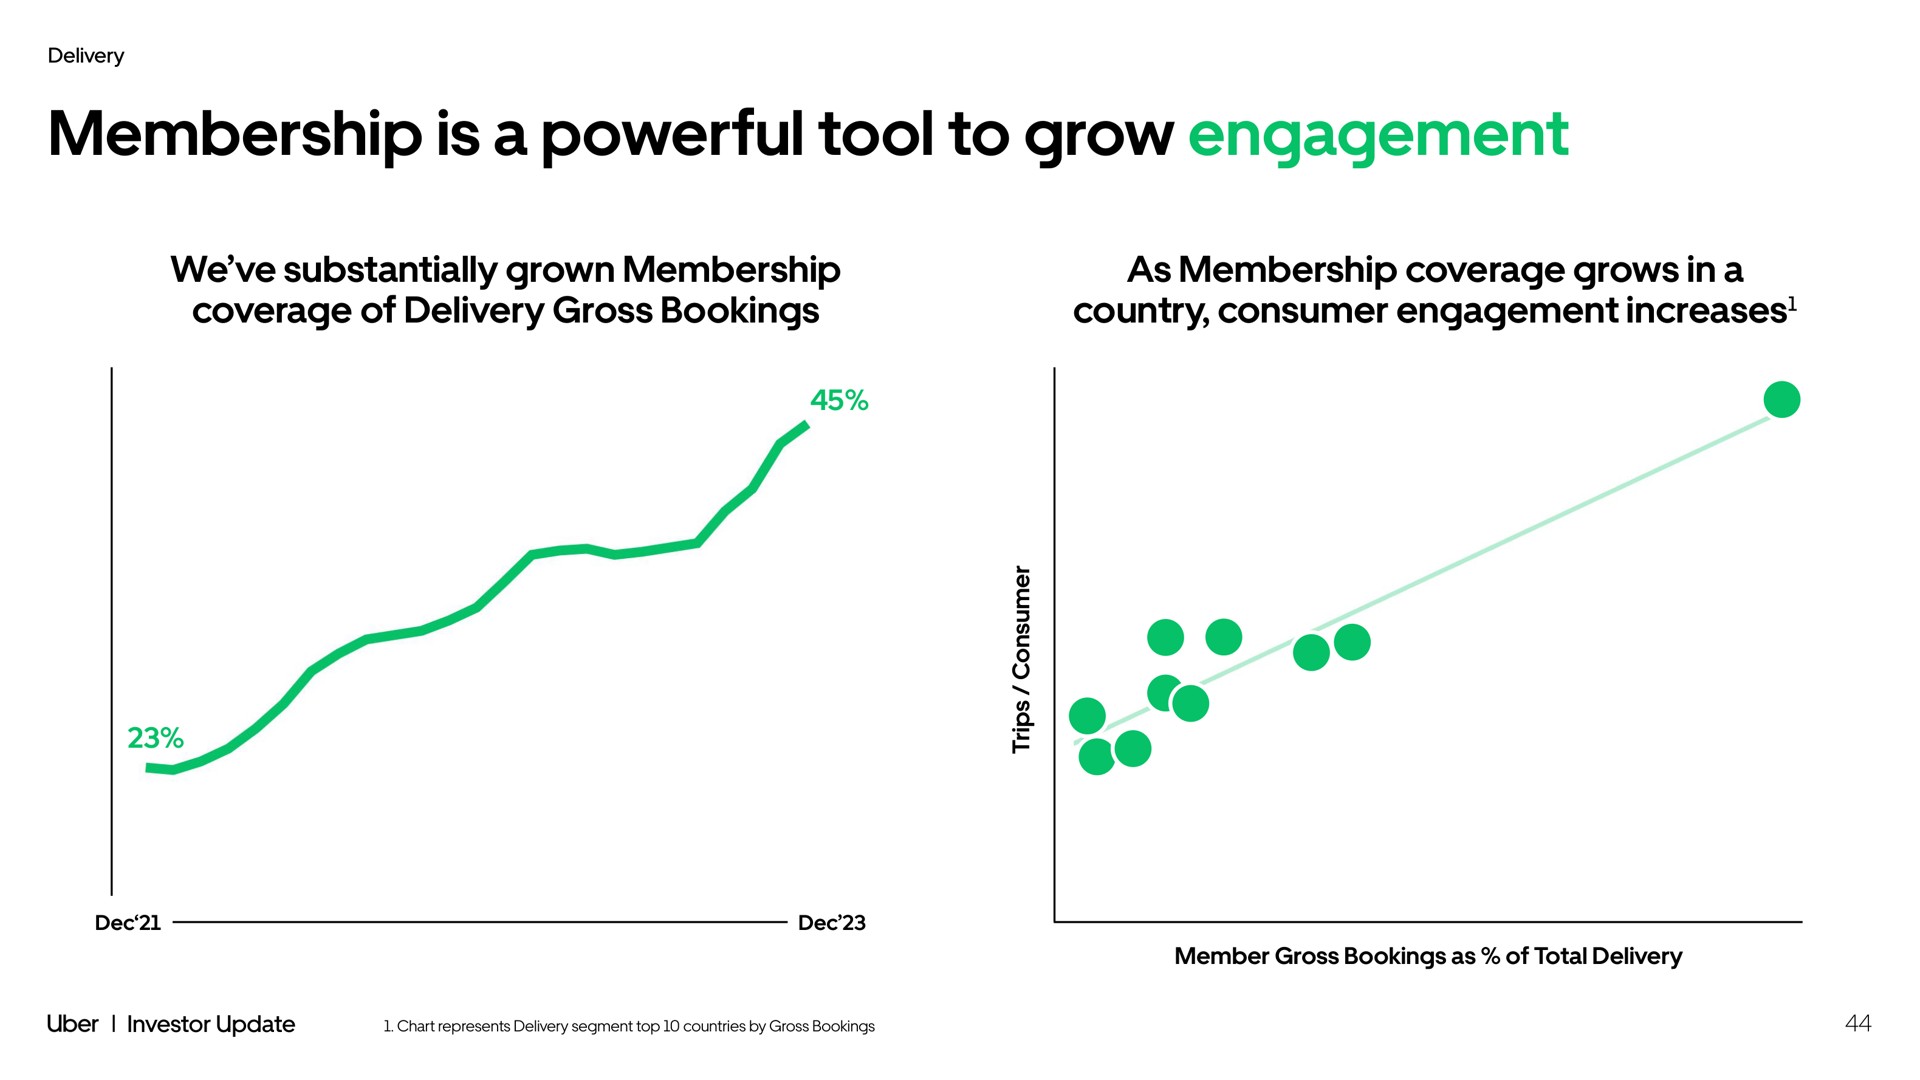 membership is a powerful tool to grow engagement we substantially grown membership coverage of delivery gross bookings as membership coverage grows in a country consumer engagement increases | Uber